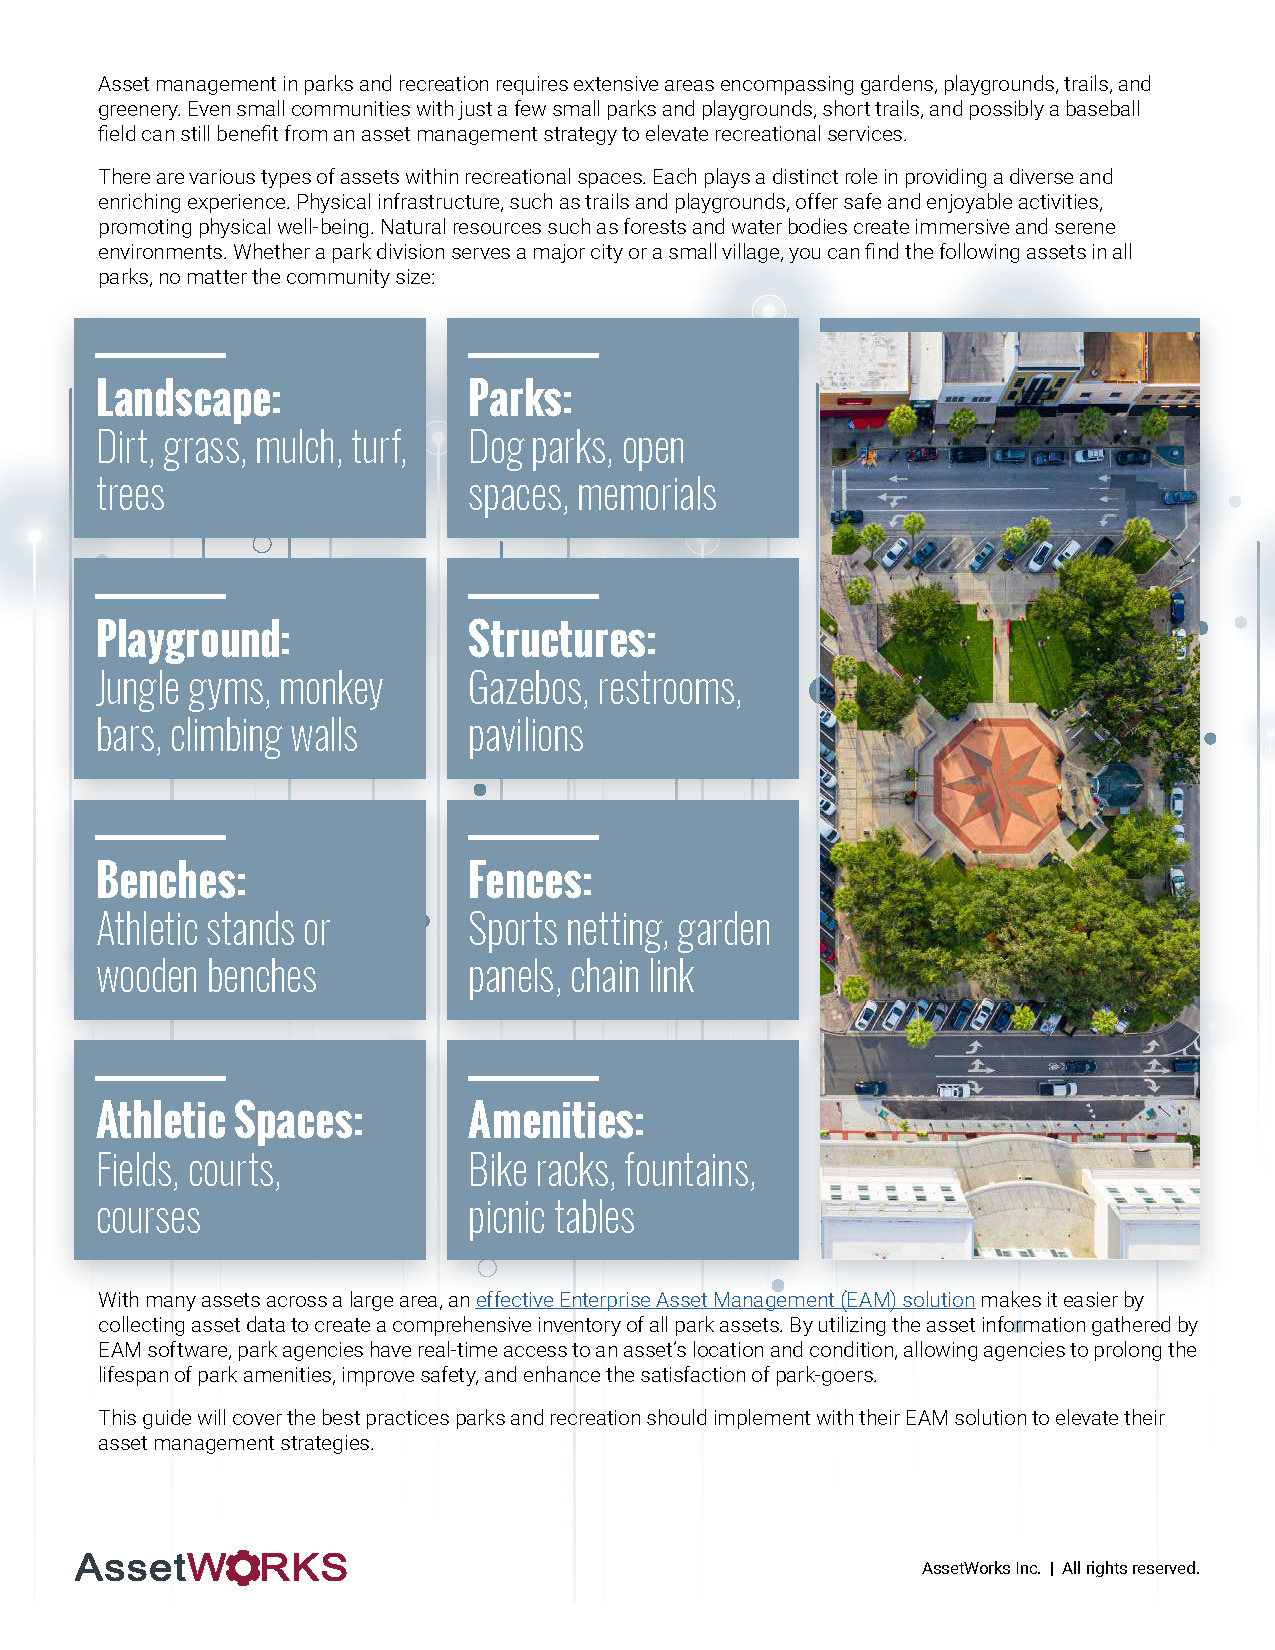 Asset Management in Parks and Rec White Paper_compressed_Page_2